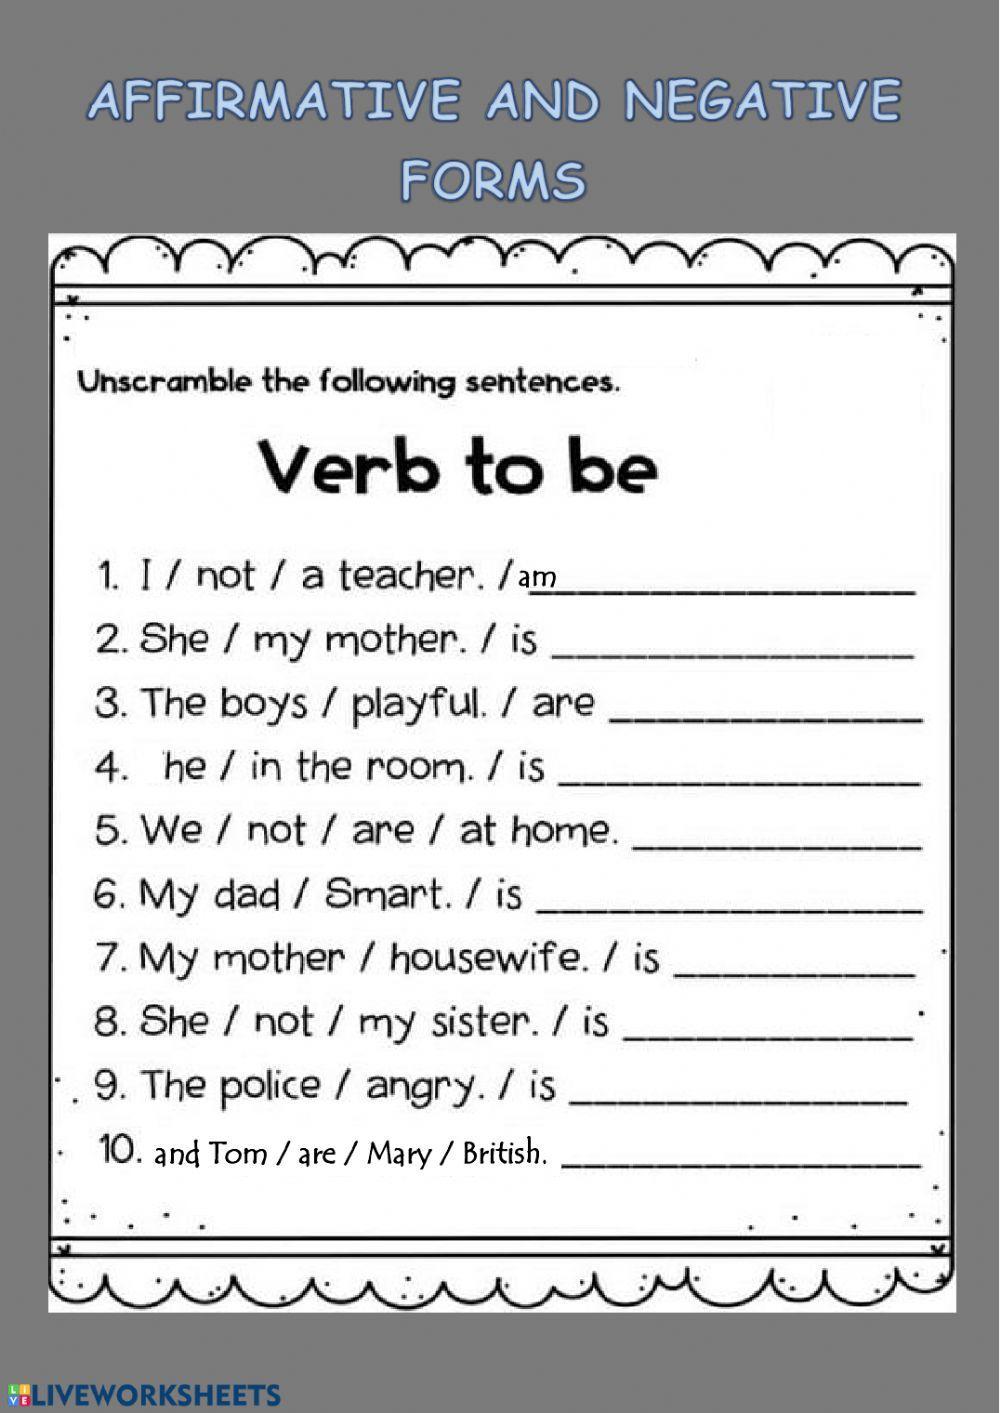 Verb to Be (present)